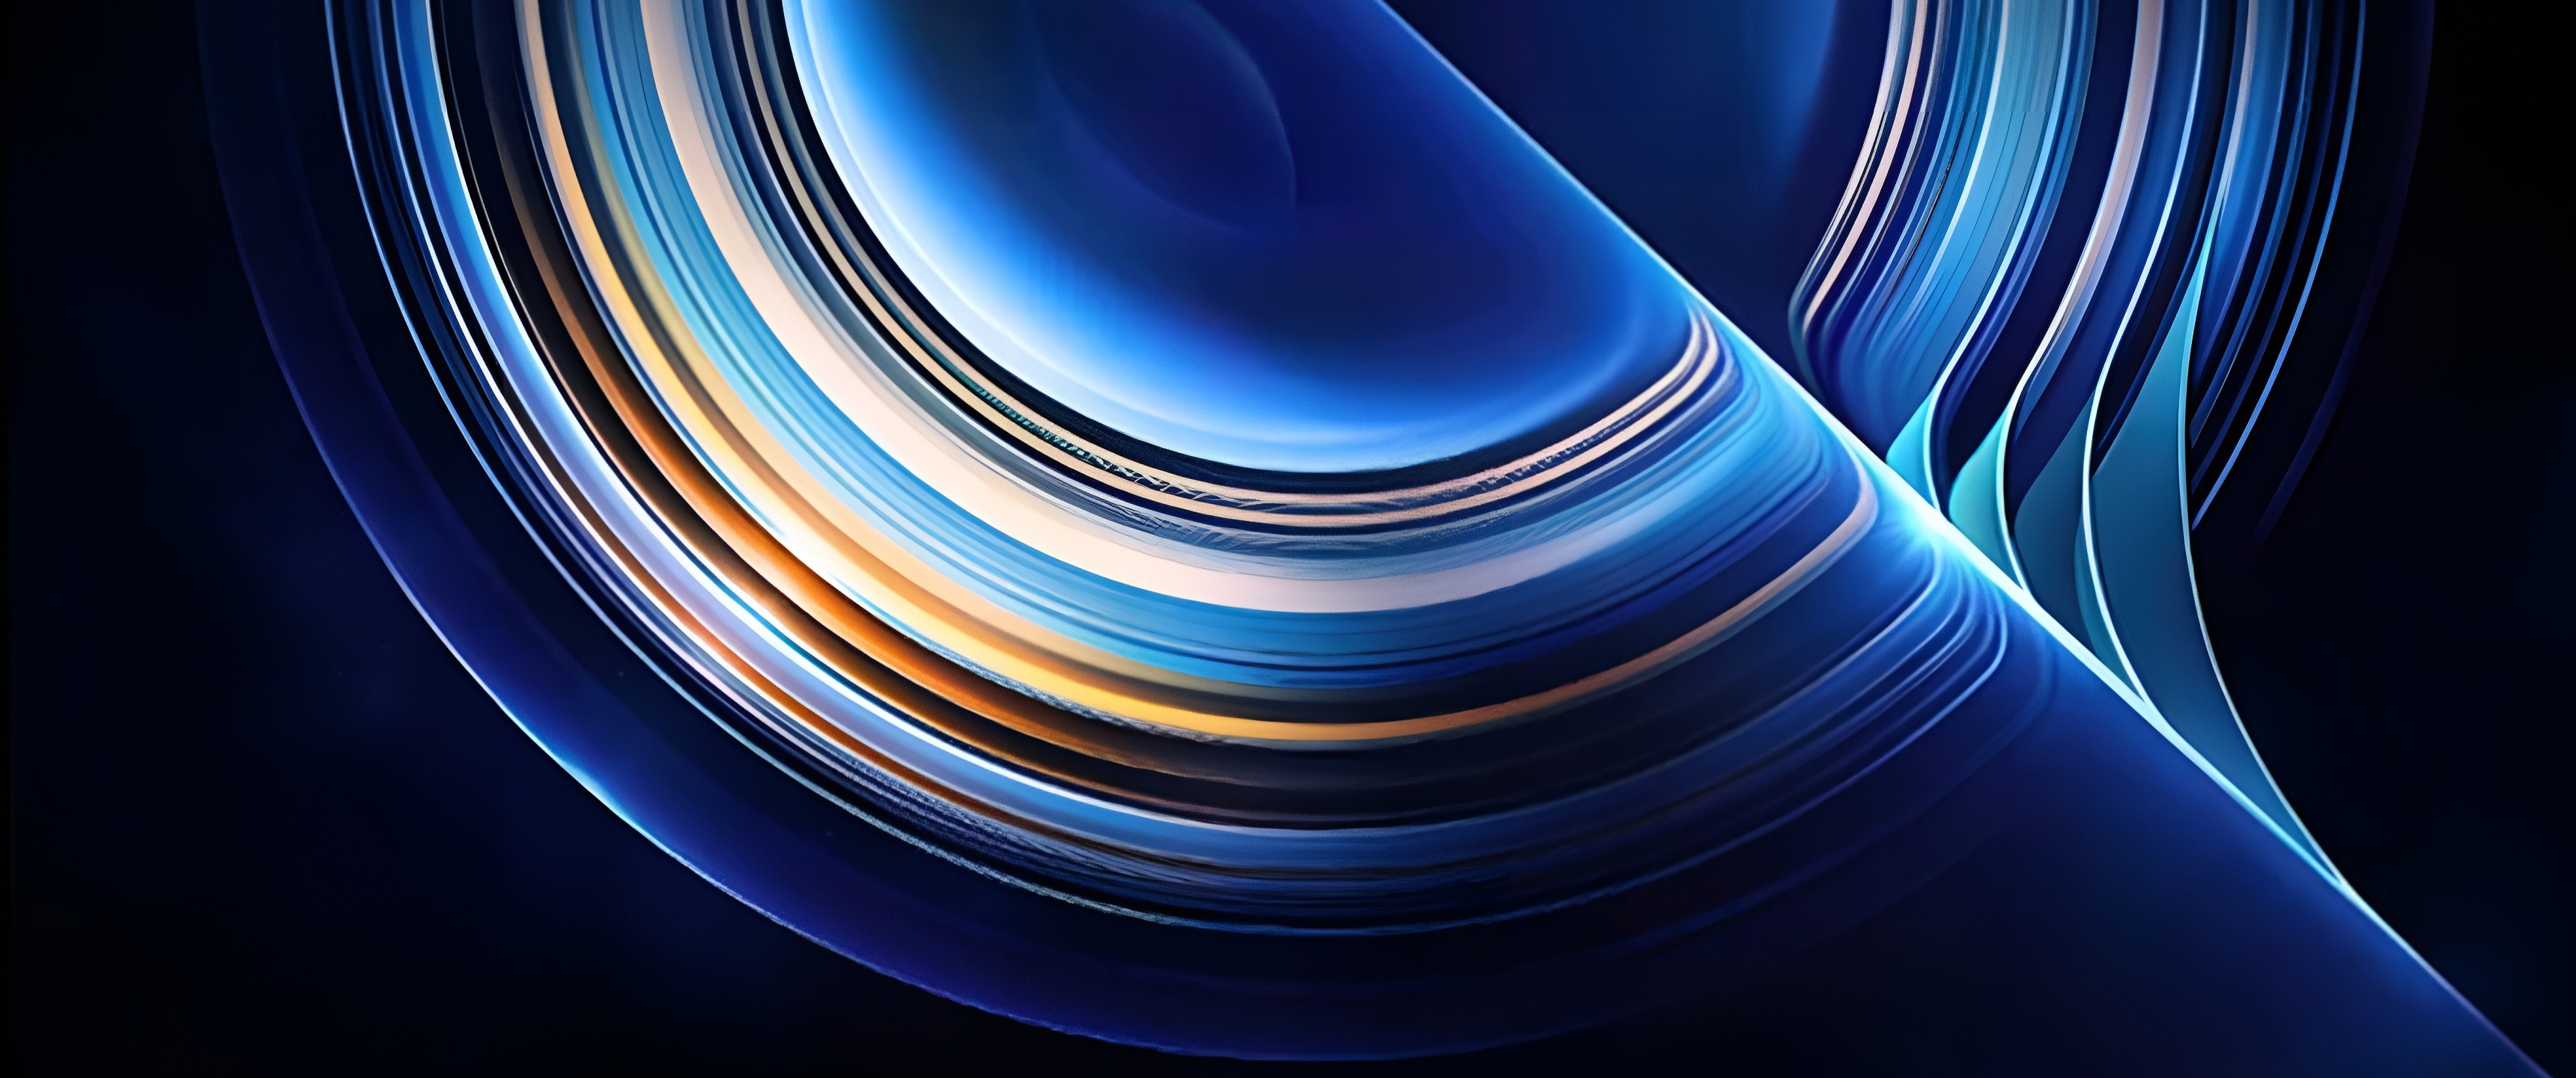 Rings Wallpaper 4K, Blue background, Abstract, #8680